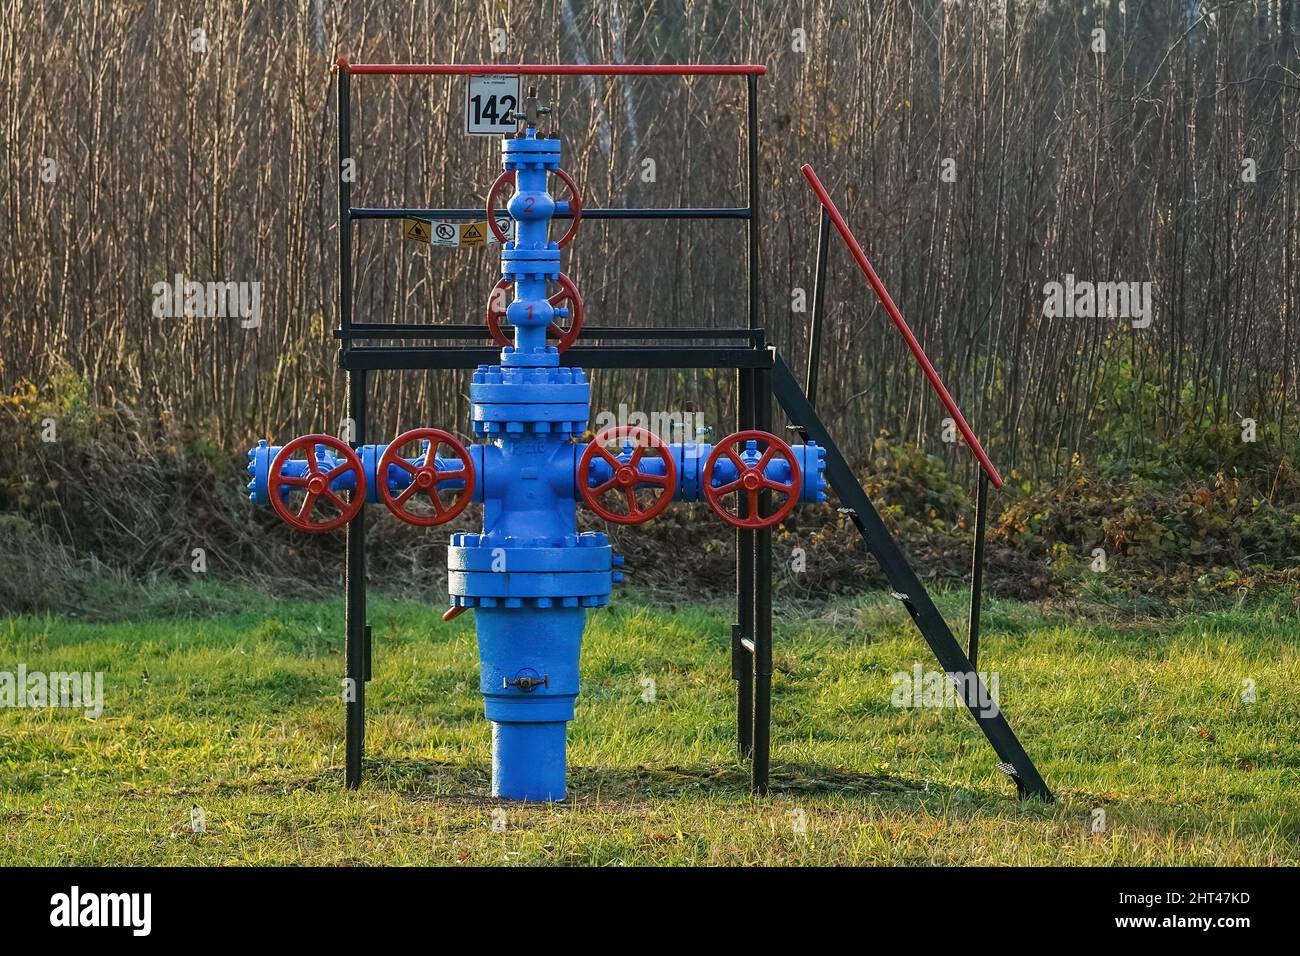 Blue fountain fittings with red valves in a gas well Stock Photo